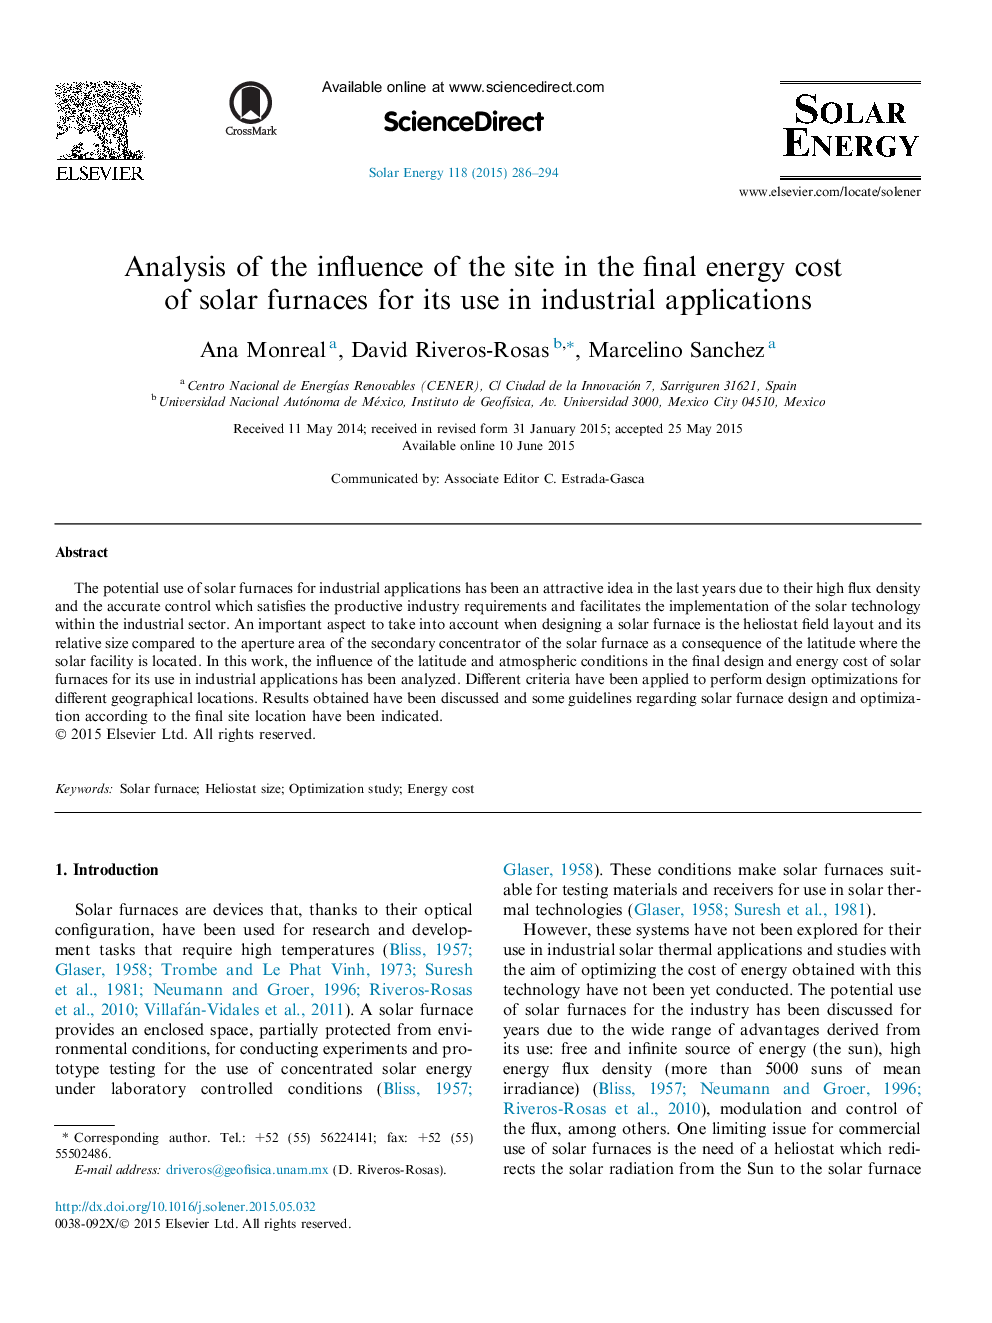 Analysis of the influence of the site in the final energy cost of solar furnaces for its use in industrial applications